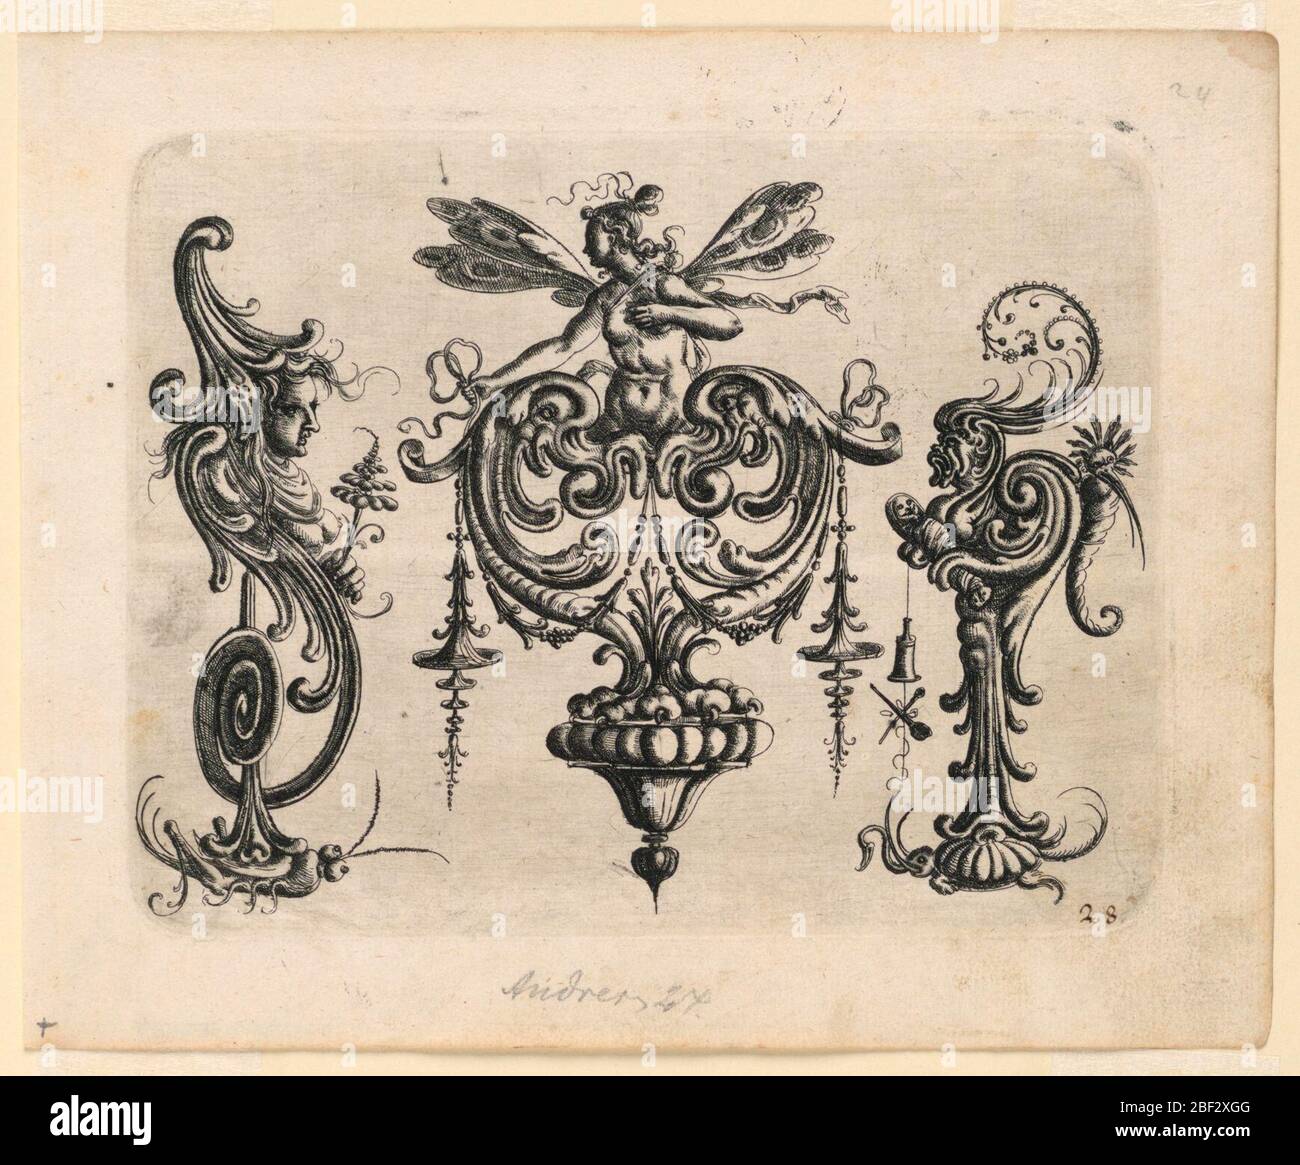 Plate 28 from New Grotteken Buch New Grotesque Book. Ornamental cartouche composed of auricular, cartilage-like form in a heart shape, surmounted by a half-length female winged figure. At either side, similar forms of volute shape rest on a grasshopper, left, and a tortoise, right. Stock Photo